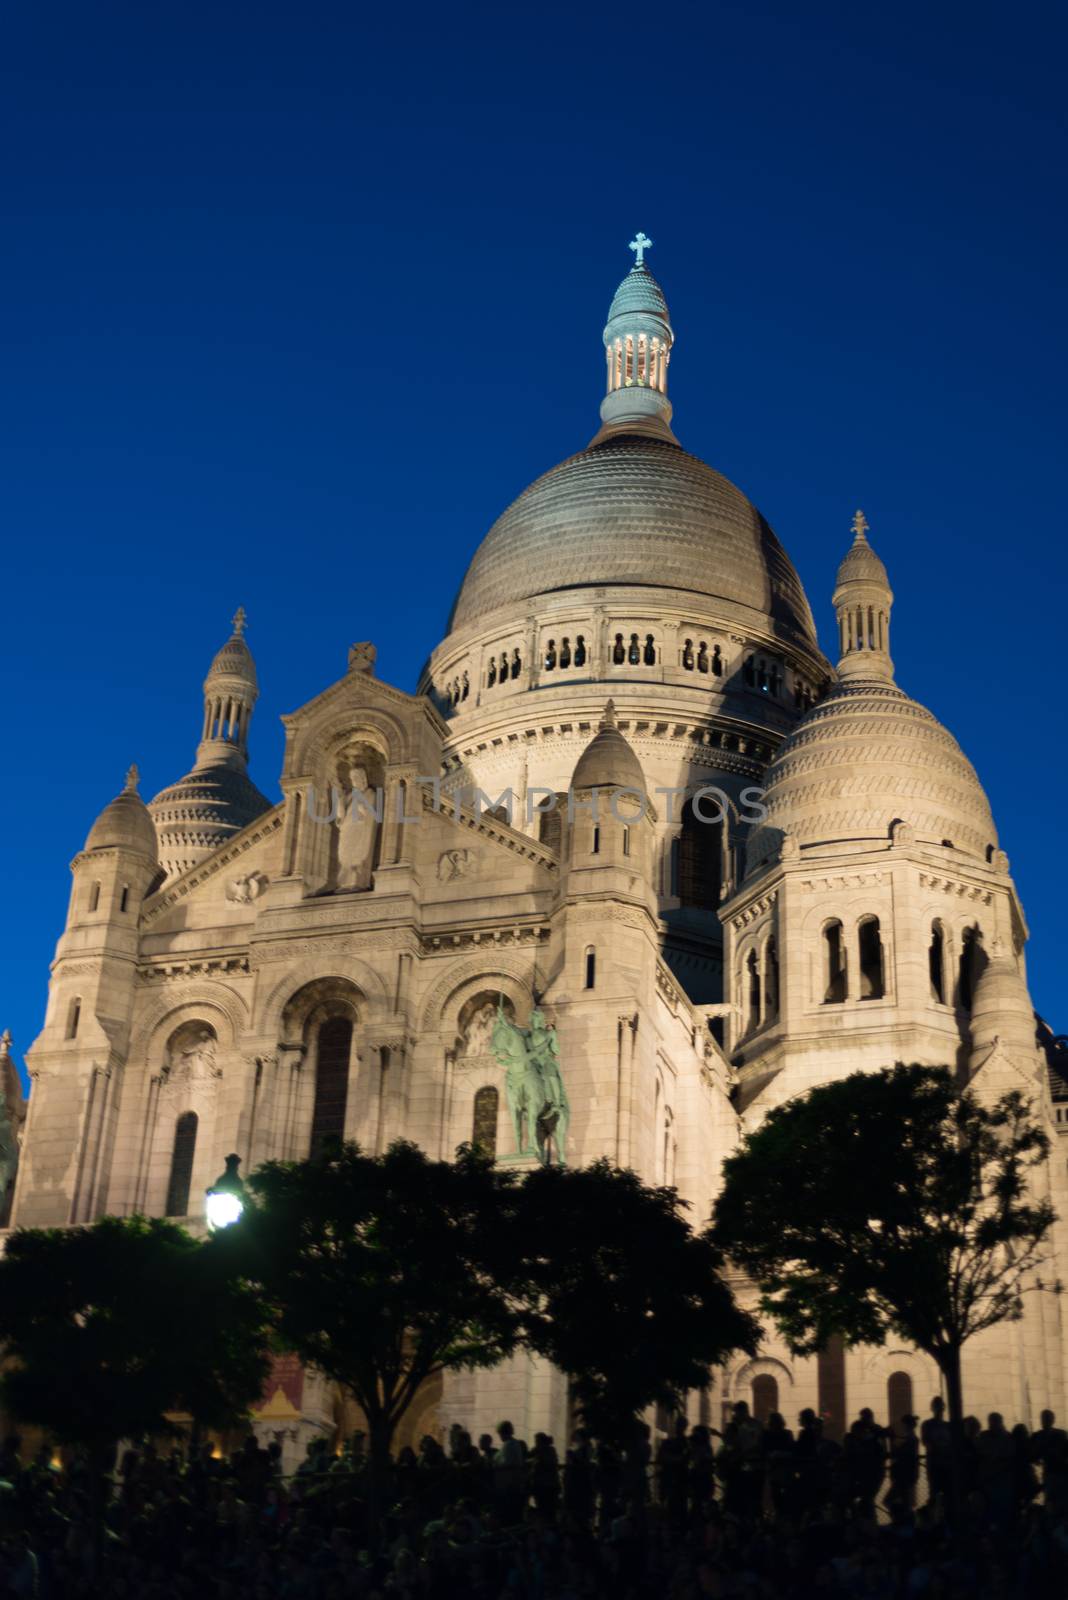 Sacre Coeur at dusk with people in Silhouette